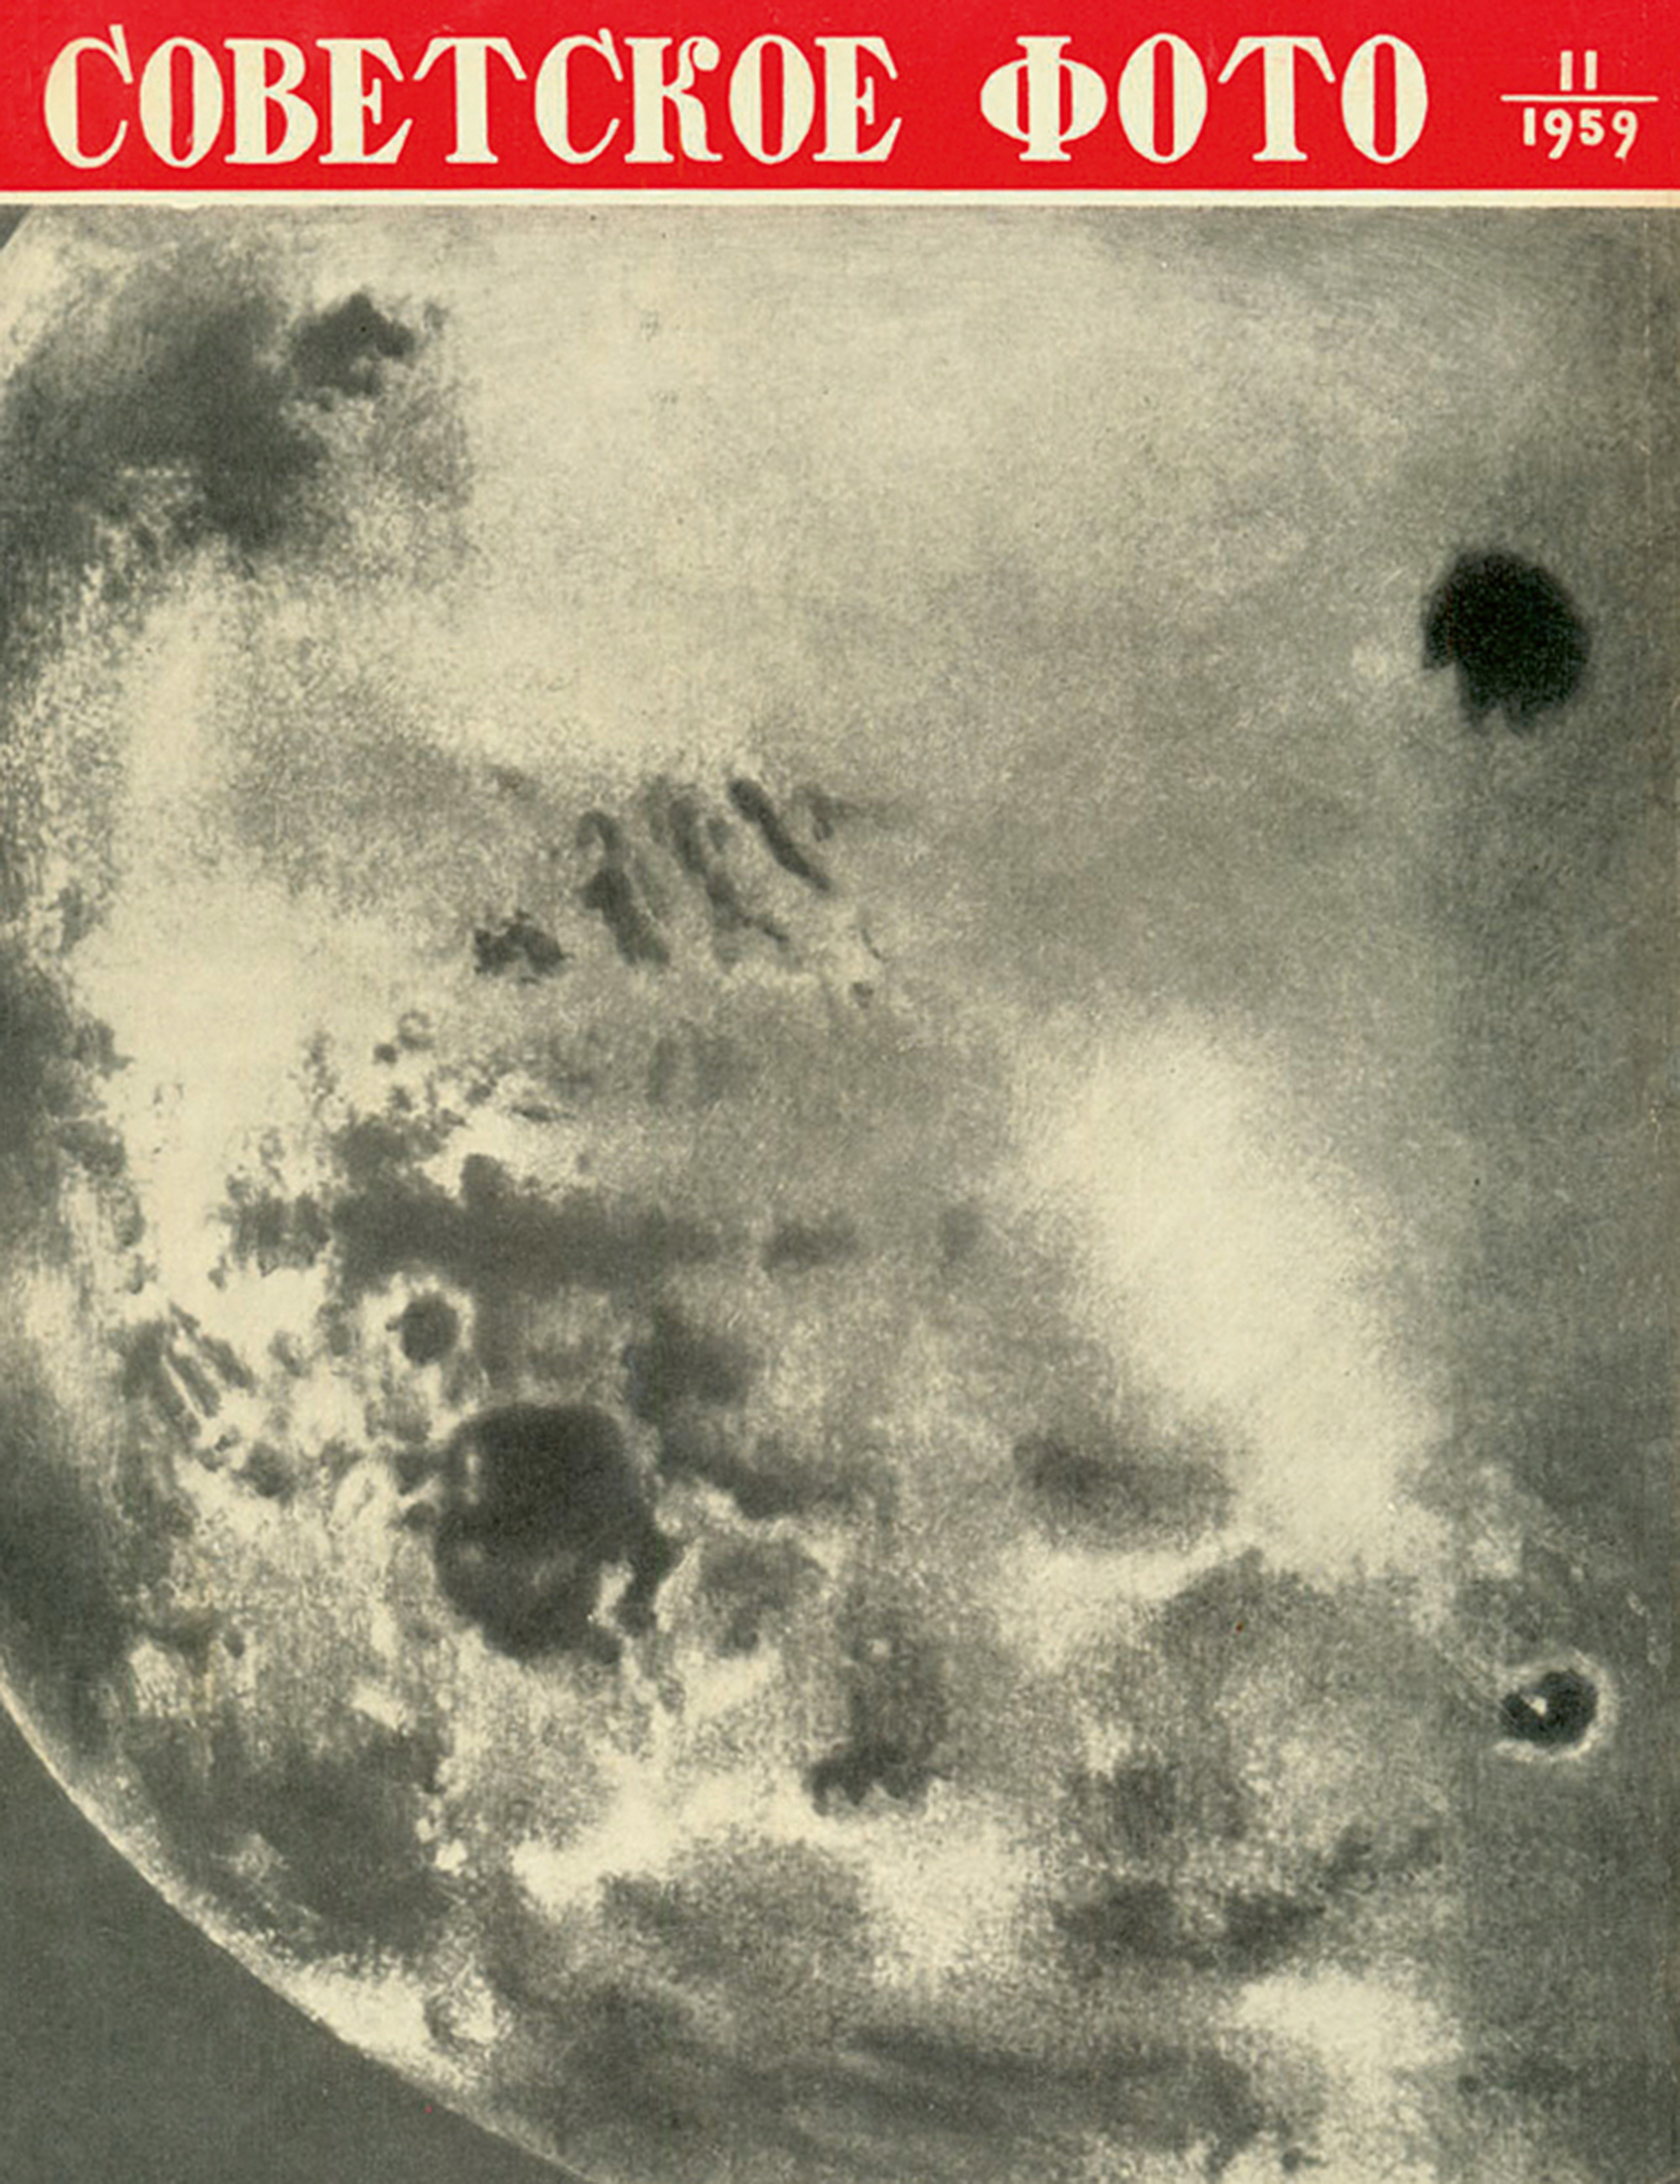 A Luna 3 image of the dark side of the moon published on the cover of the November nineteen fifty-nine issue of Sovetskoe Foto.